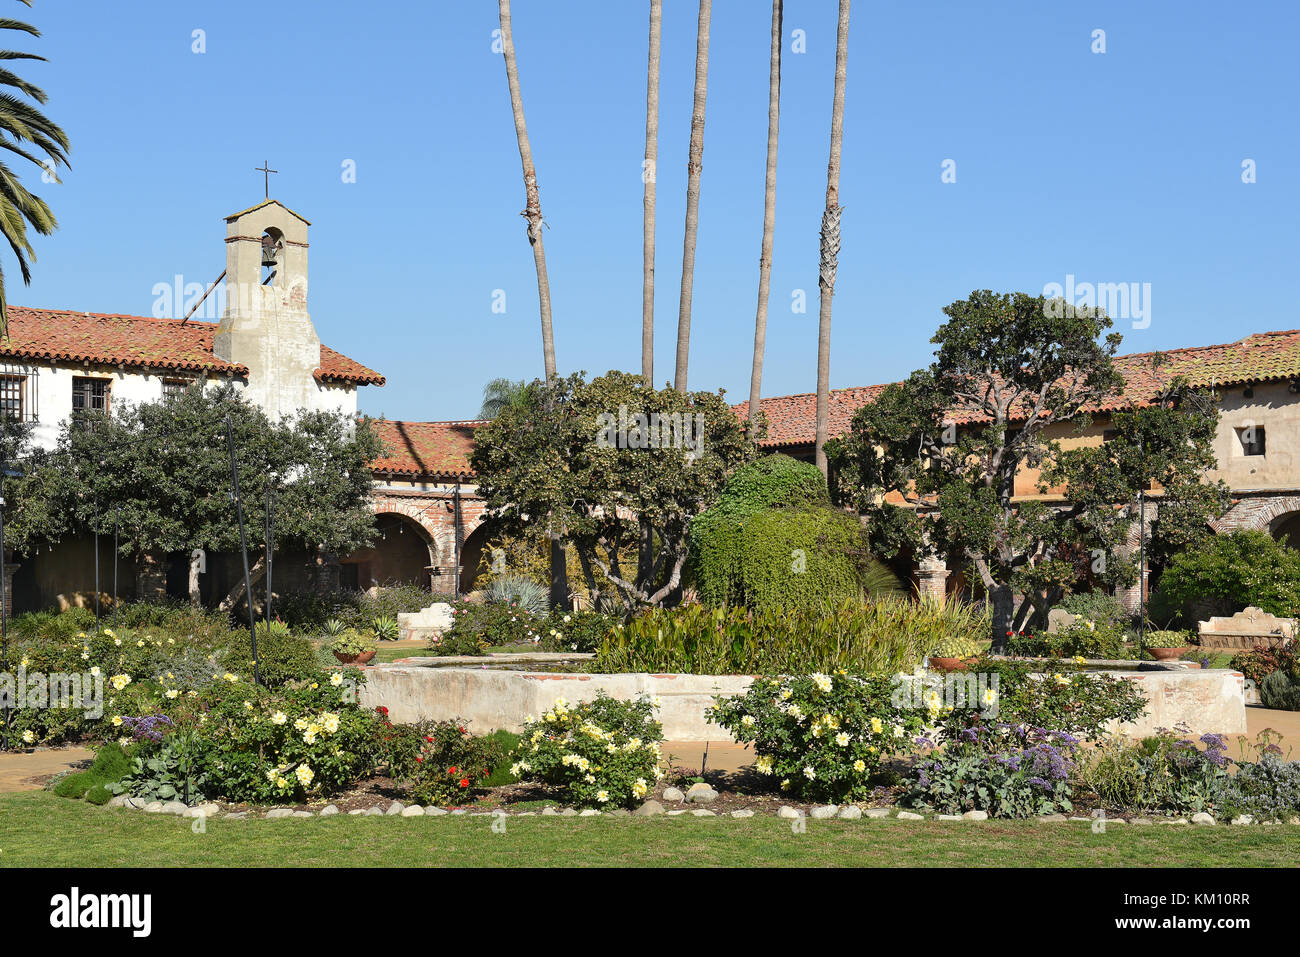 San Juan Capistrano, Ca - December 1, 2017: Pond in the Central Courtyard of the 7th mission founded in 1776 by Father Junipero Serra. Stock Photo